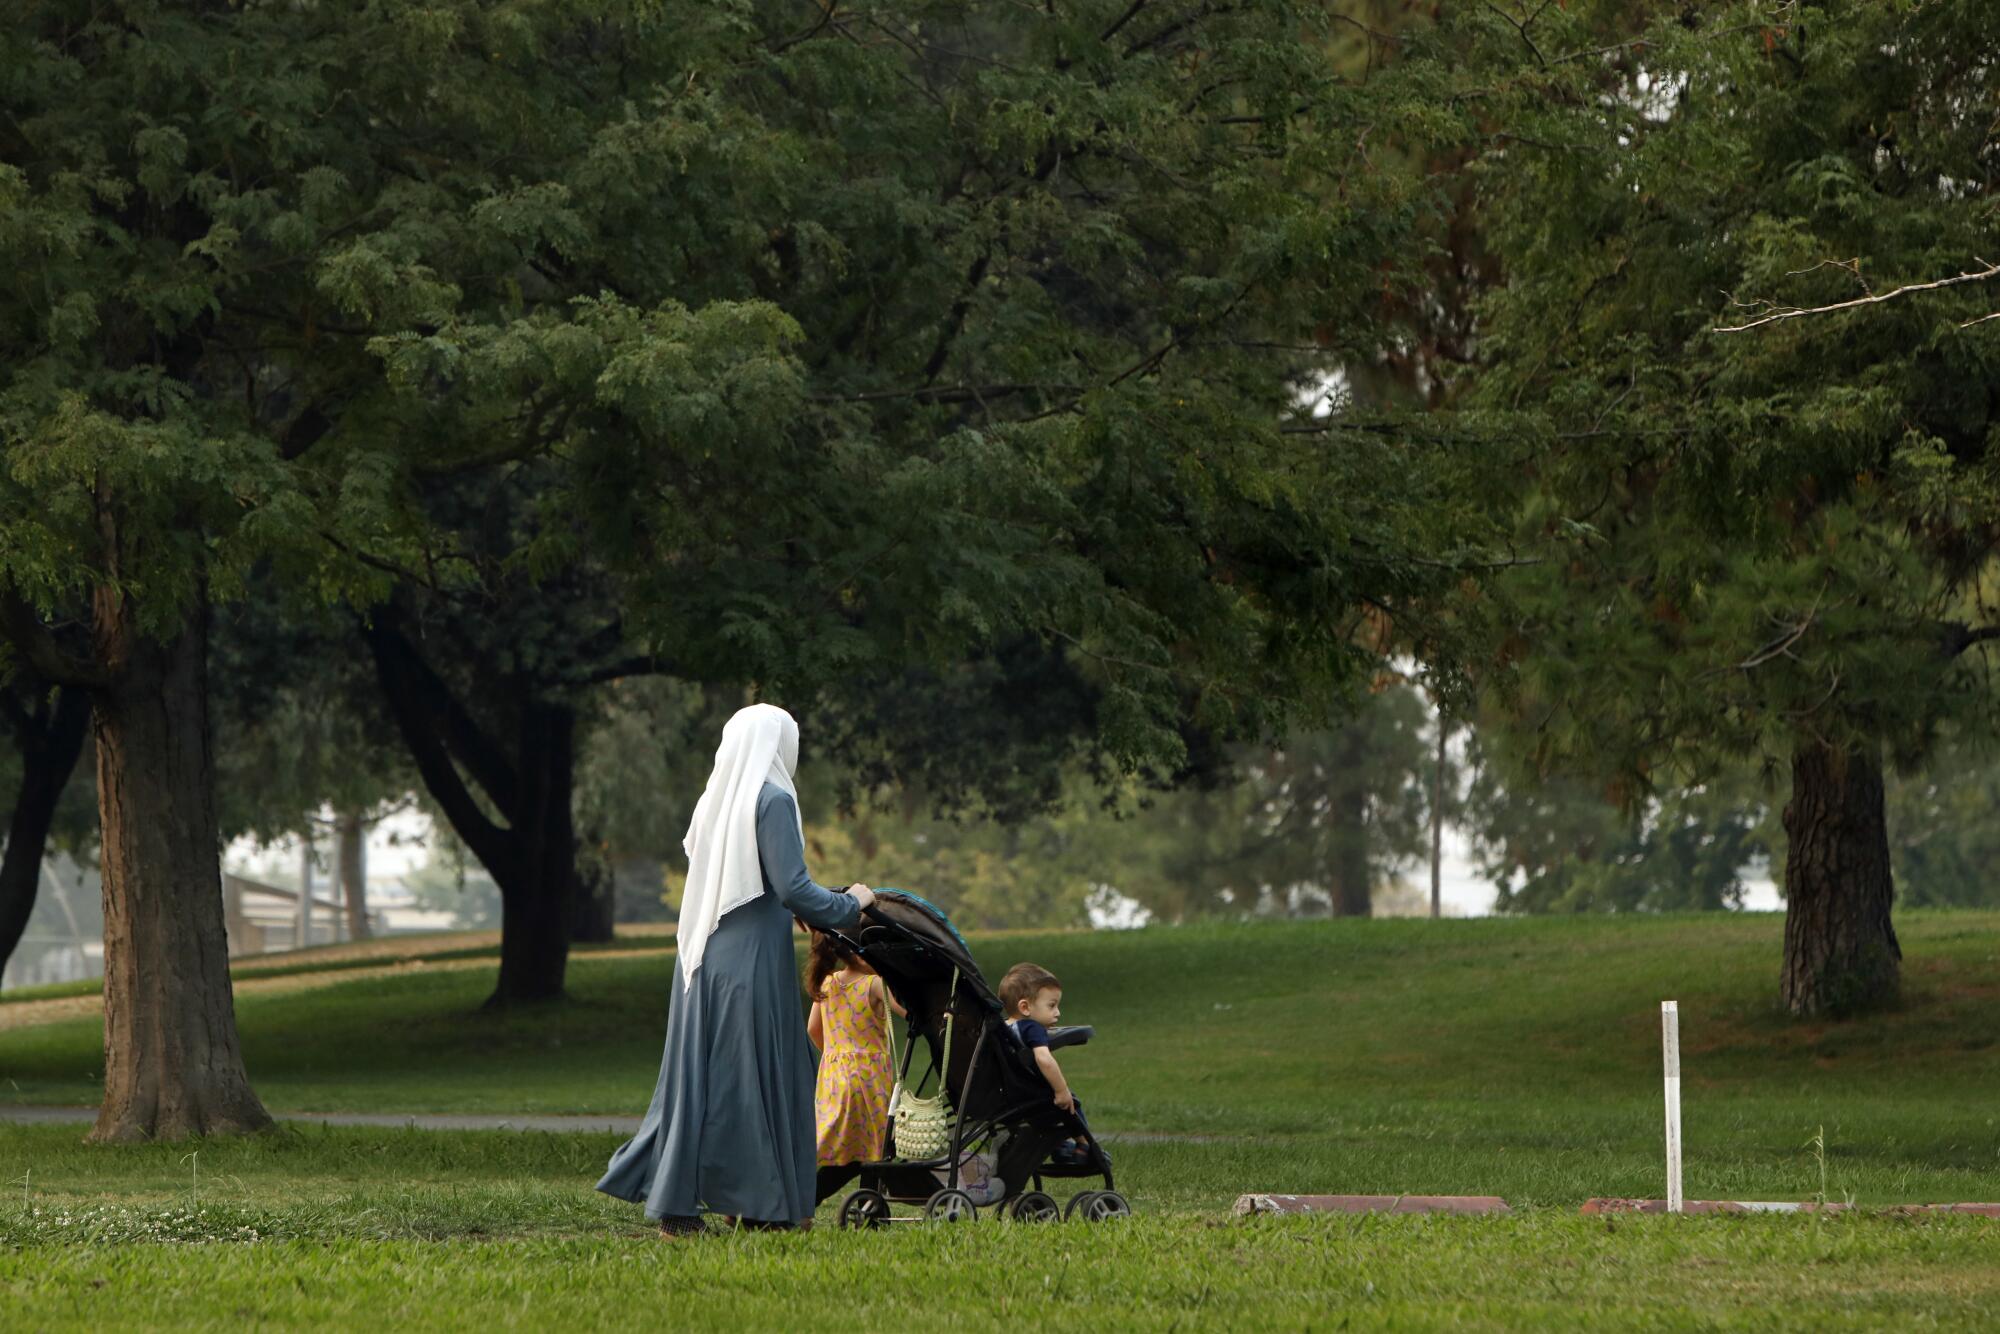 A woman pushes a child in a stroller while another walks beside them in a park